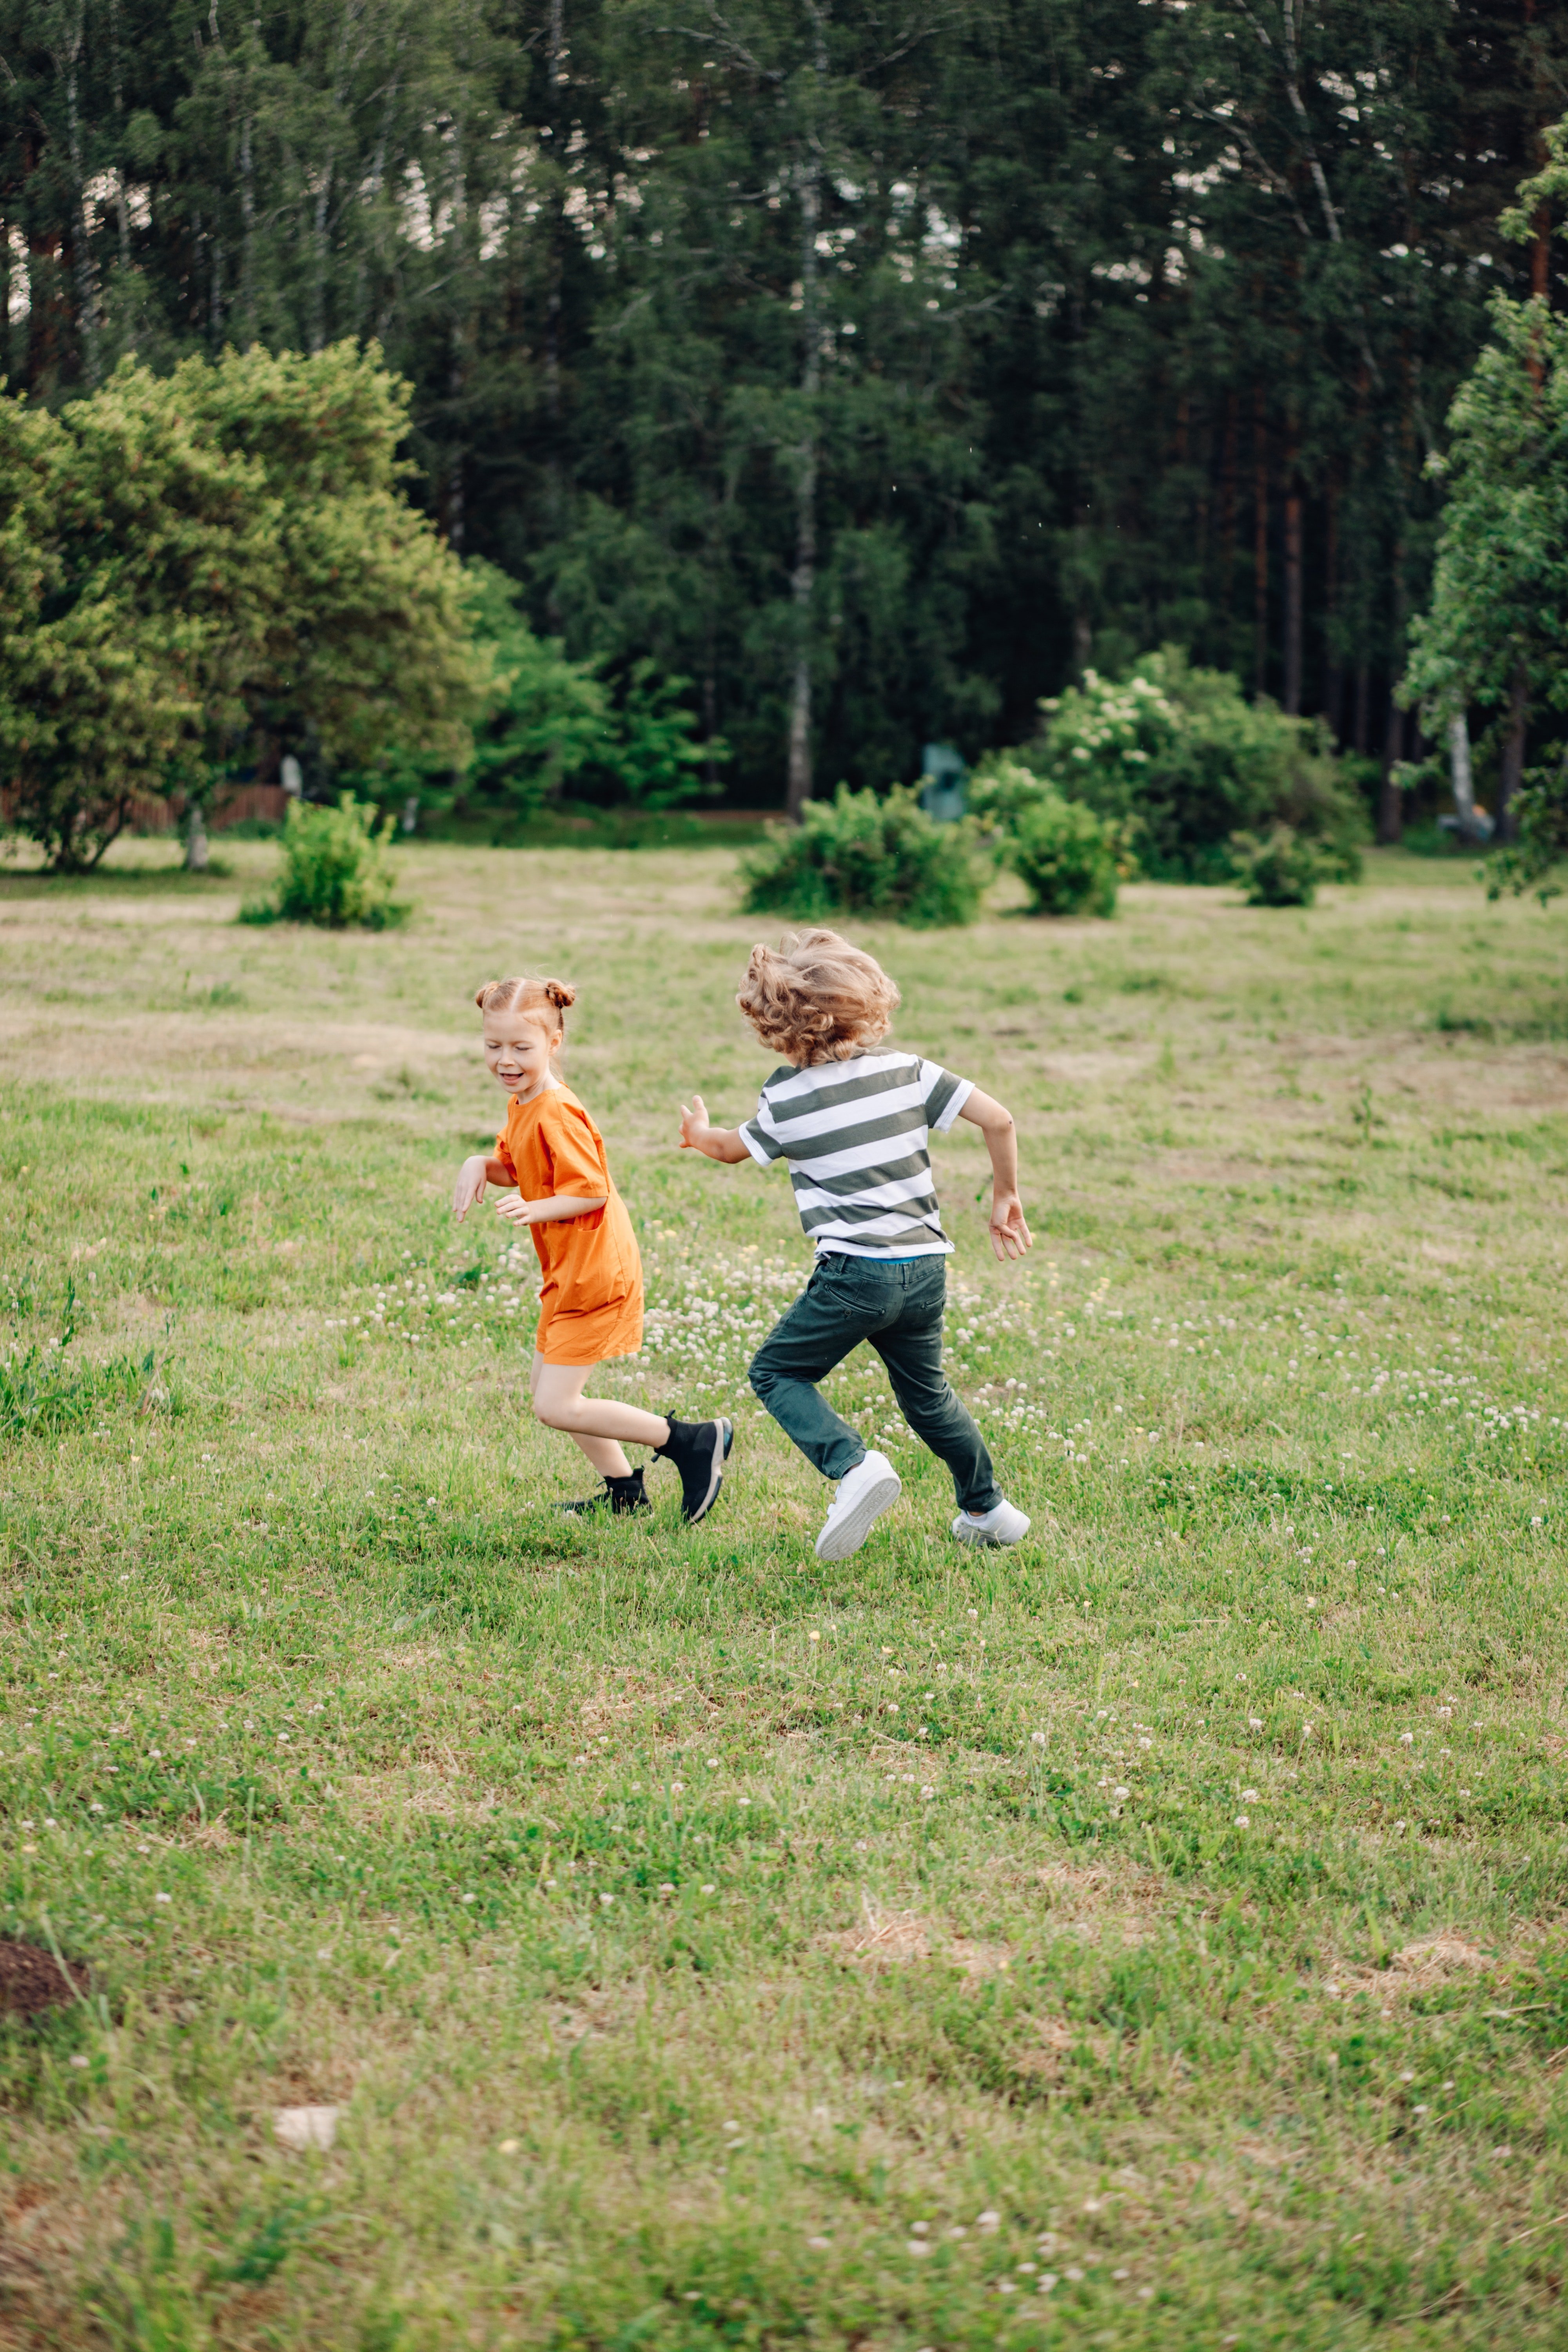 Sandra loved the sound of happy kids running in her backyard. | Source: Pexels